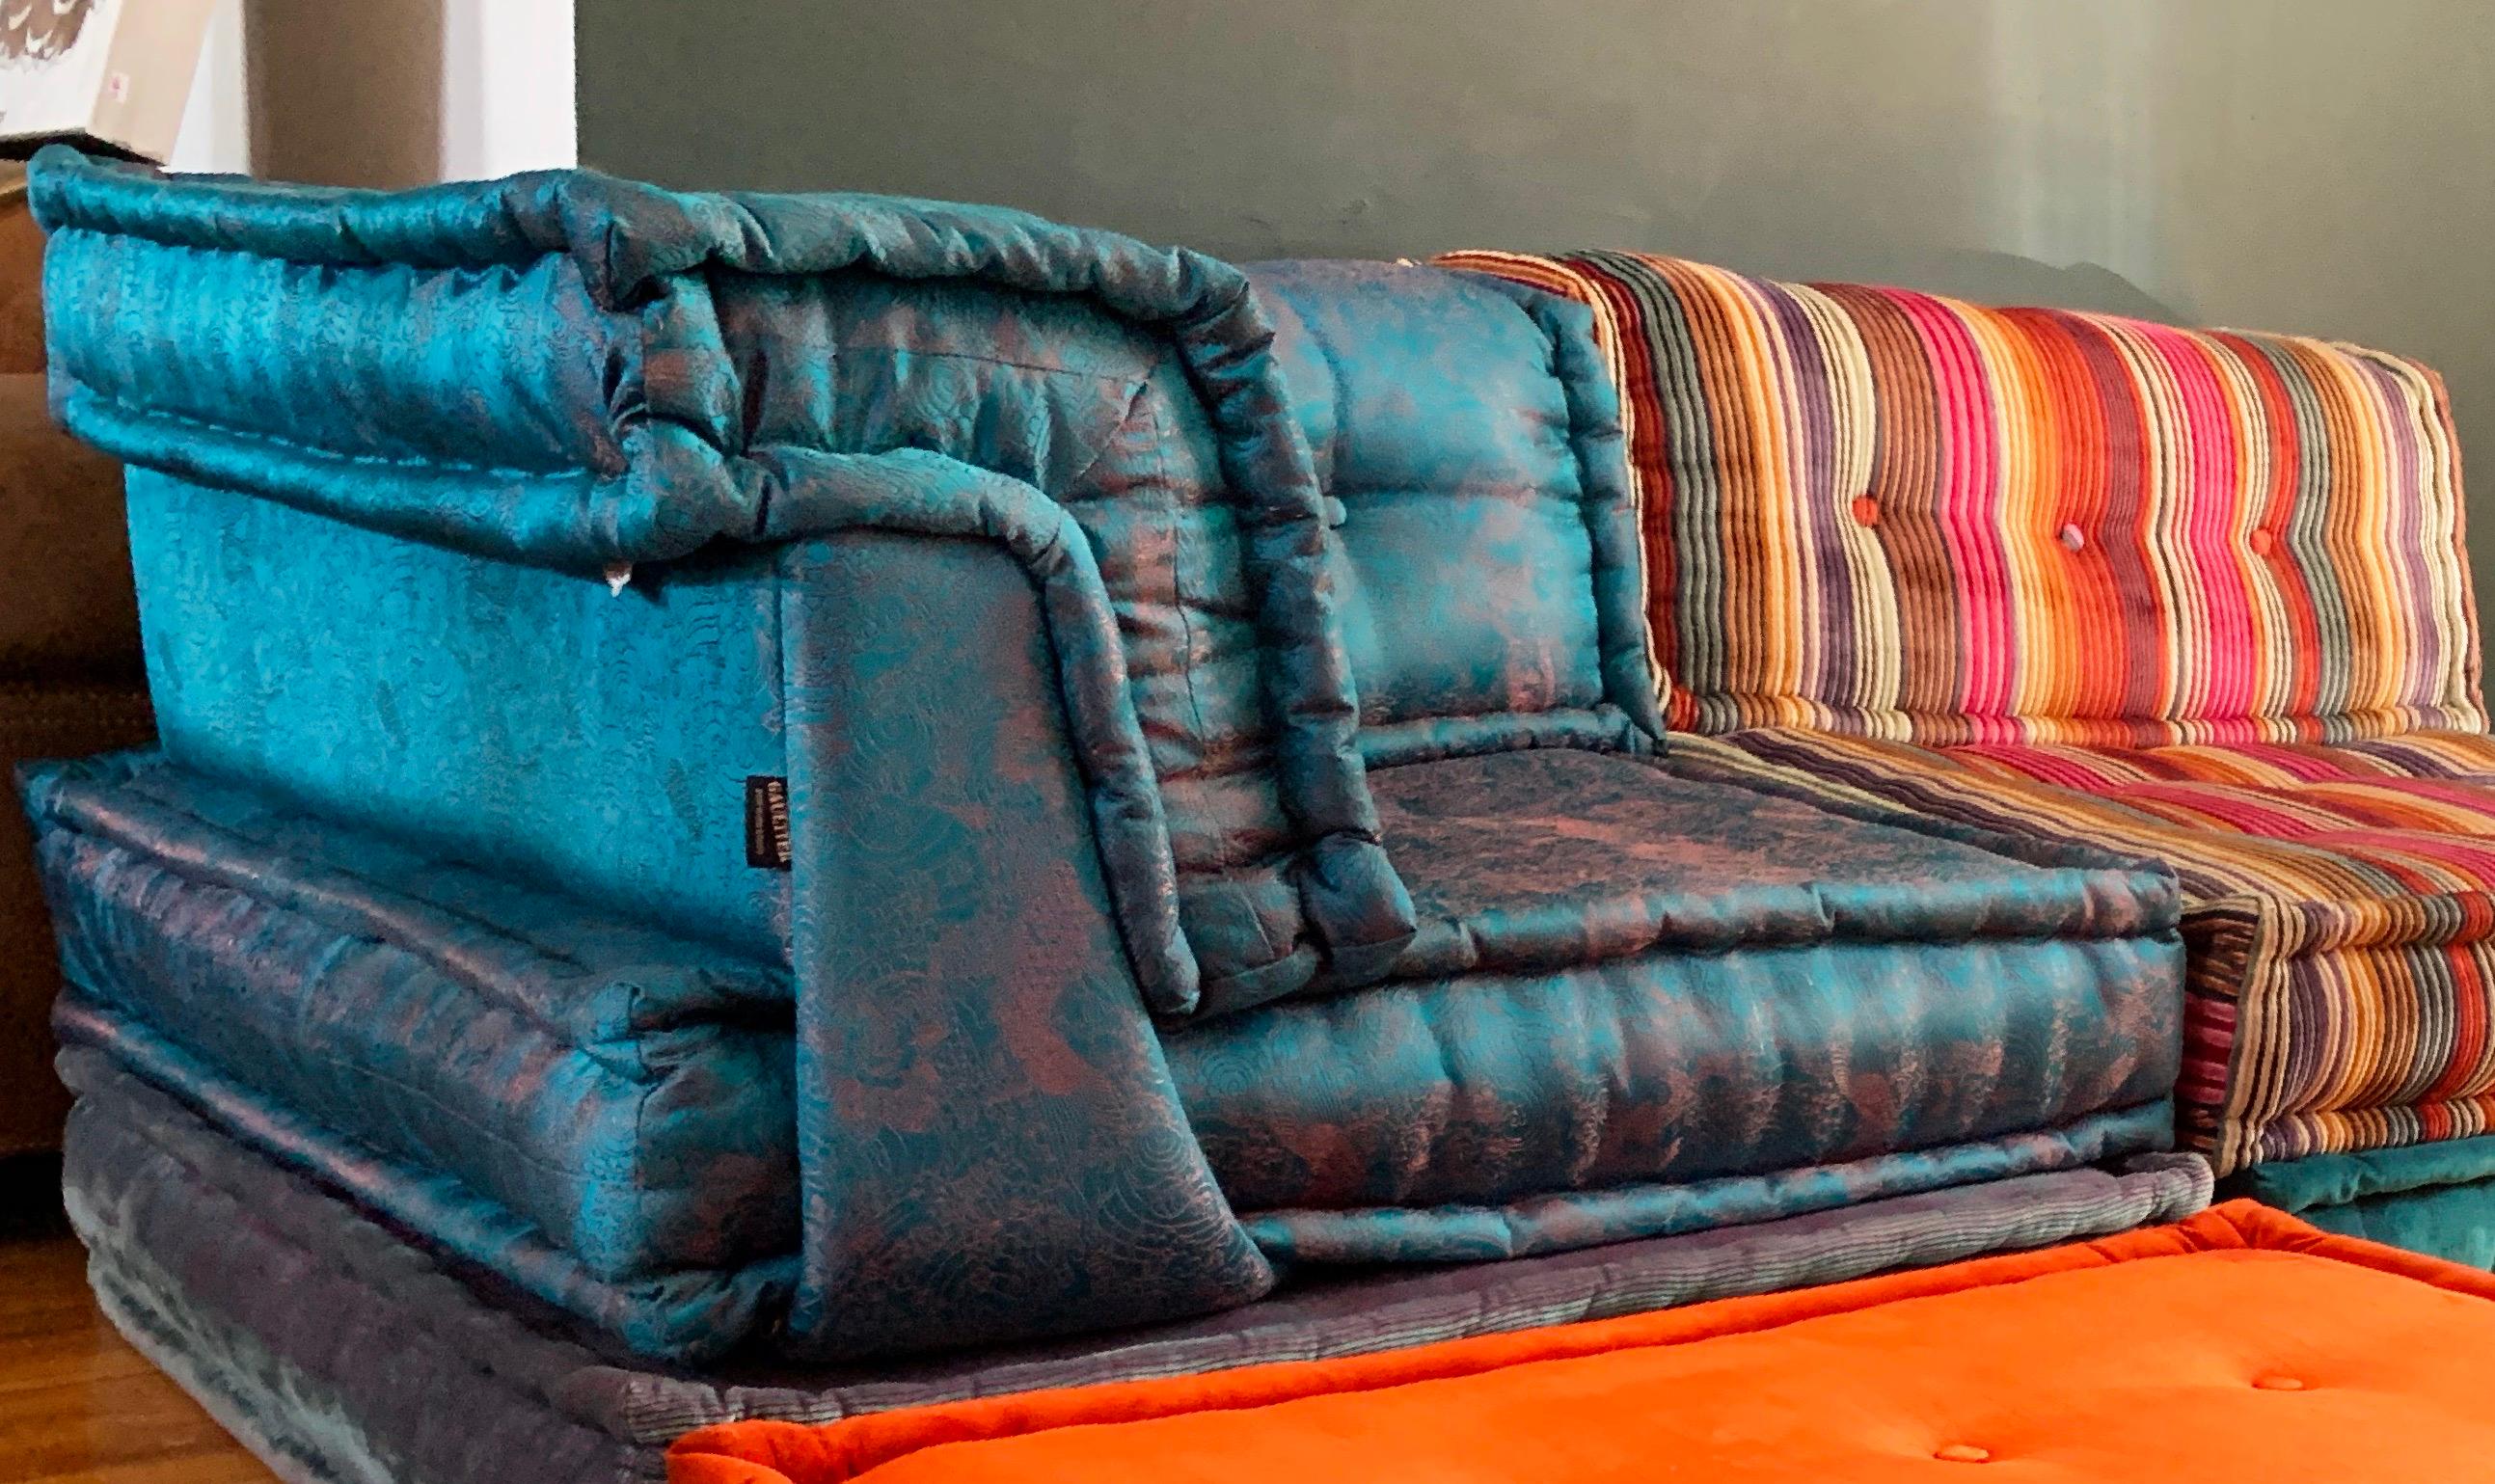 Le Mah Jong modular sofa corner lounge chair Roche Bobois Gaultier silk velvet. Extremely rare custom silk Gaultier set of two Mah Jong elements: a square cushion and the corner back element which come together as shown in the main image. 

From